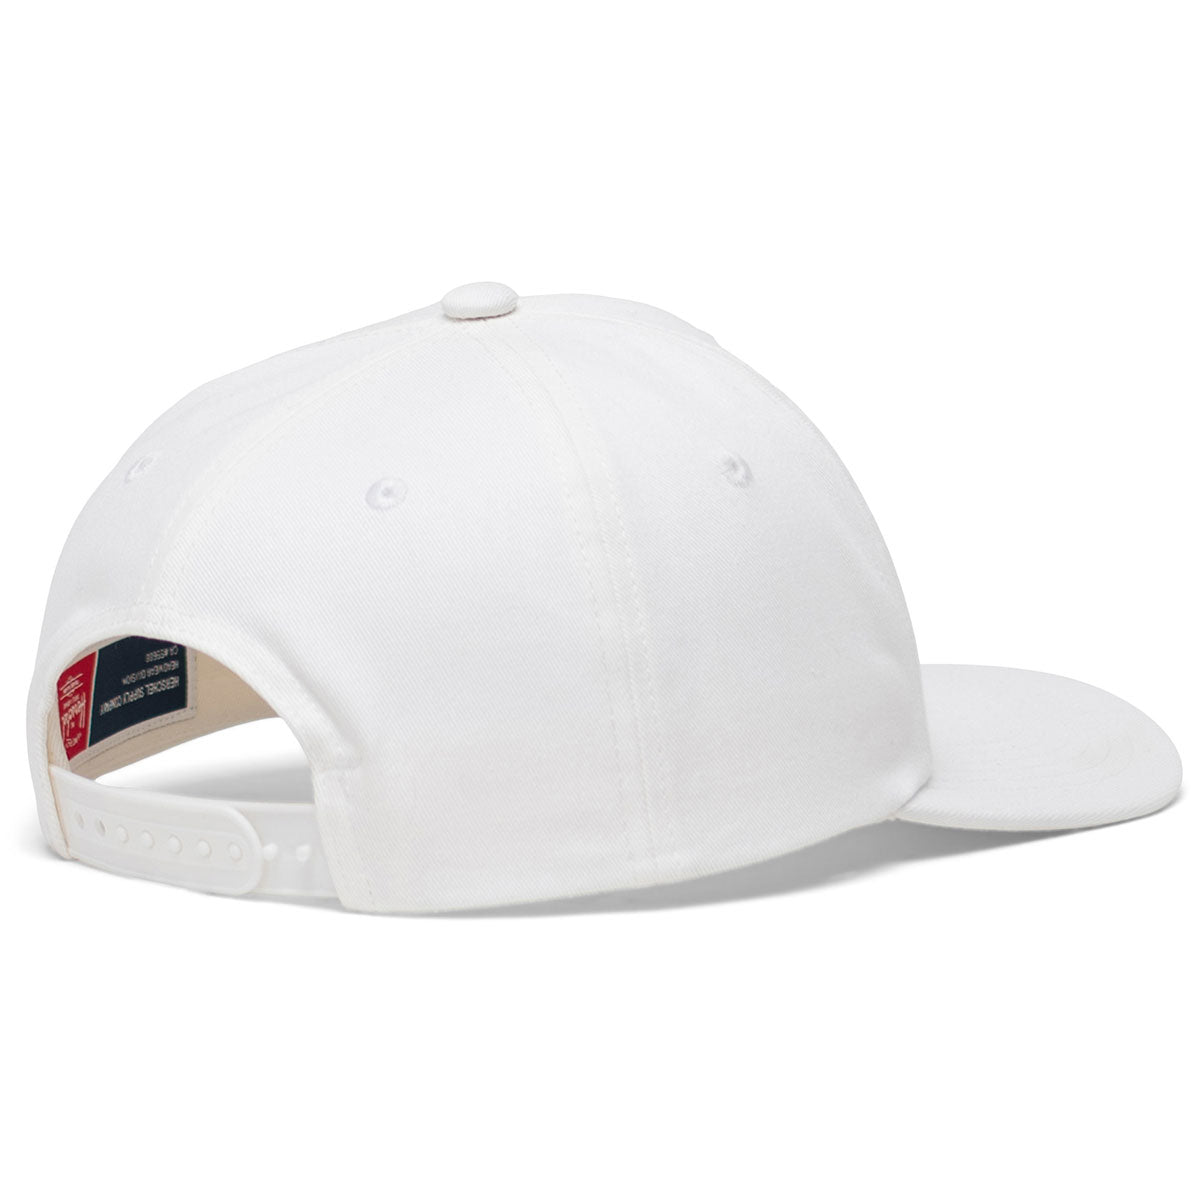 Herschel Supply Scout Embroidery Hat - White image 2